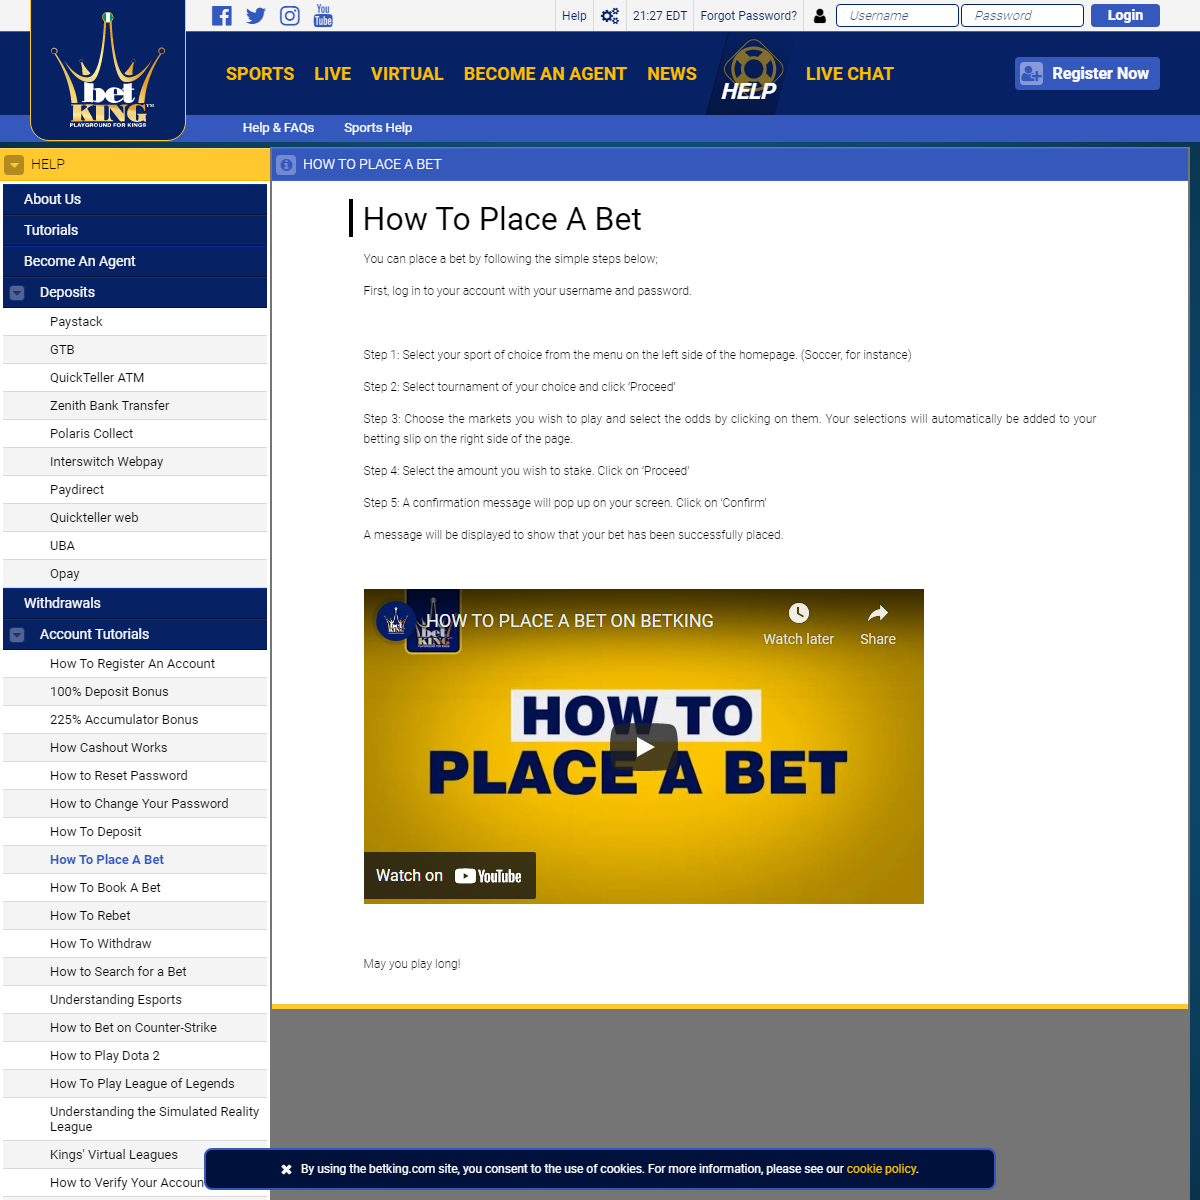 A complete backup of https://www.betking.com/help/general-help/account-tutorials/how-to-place-a-bet/